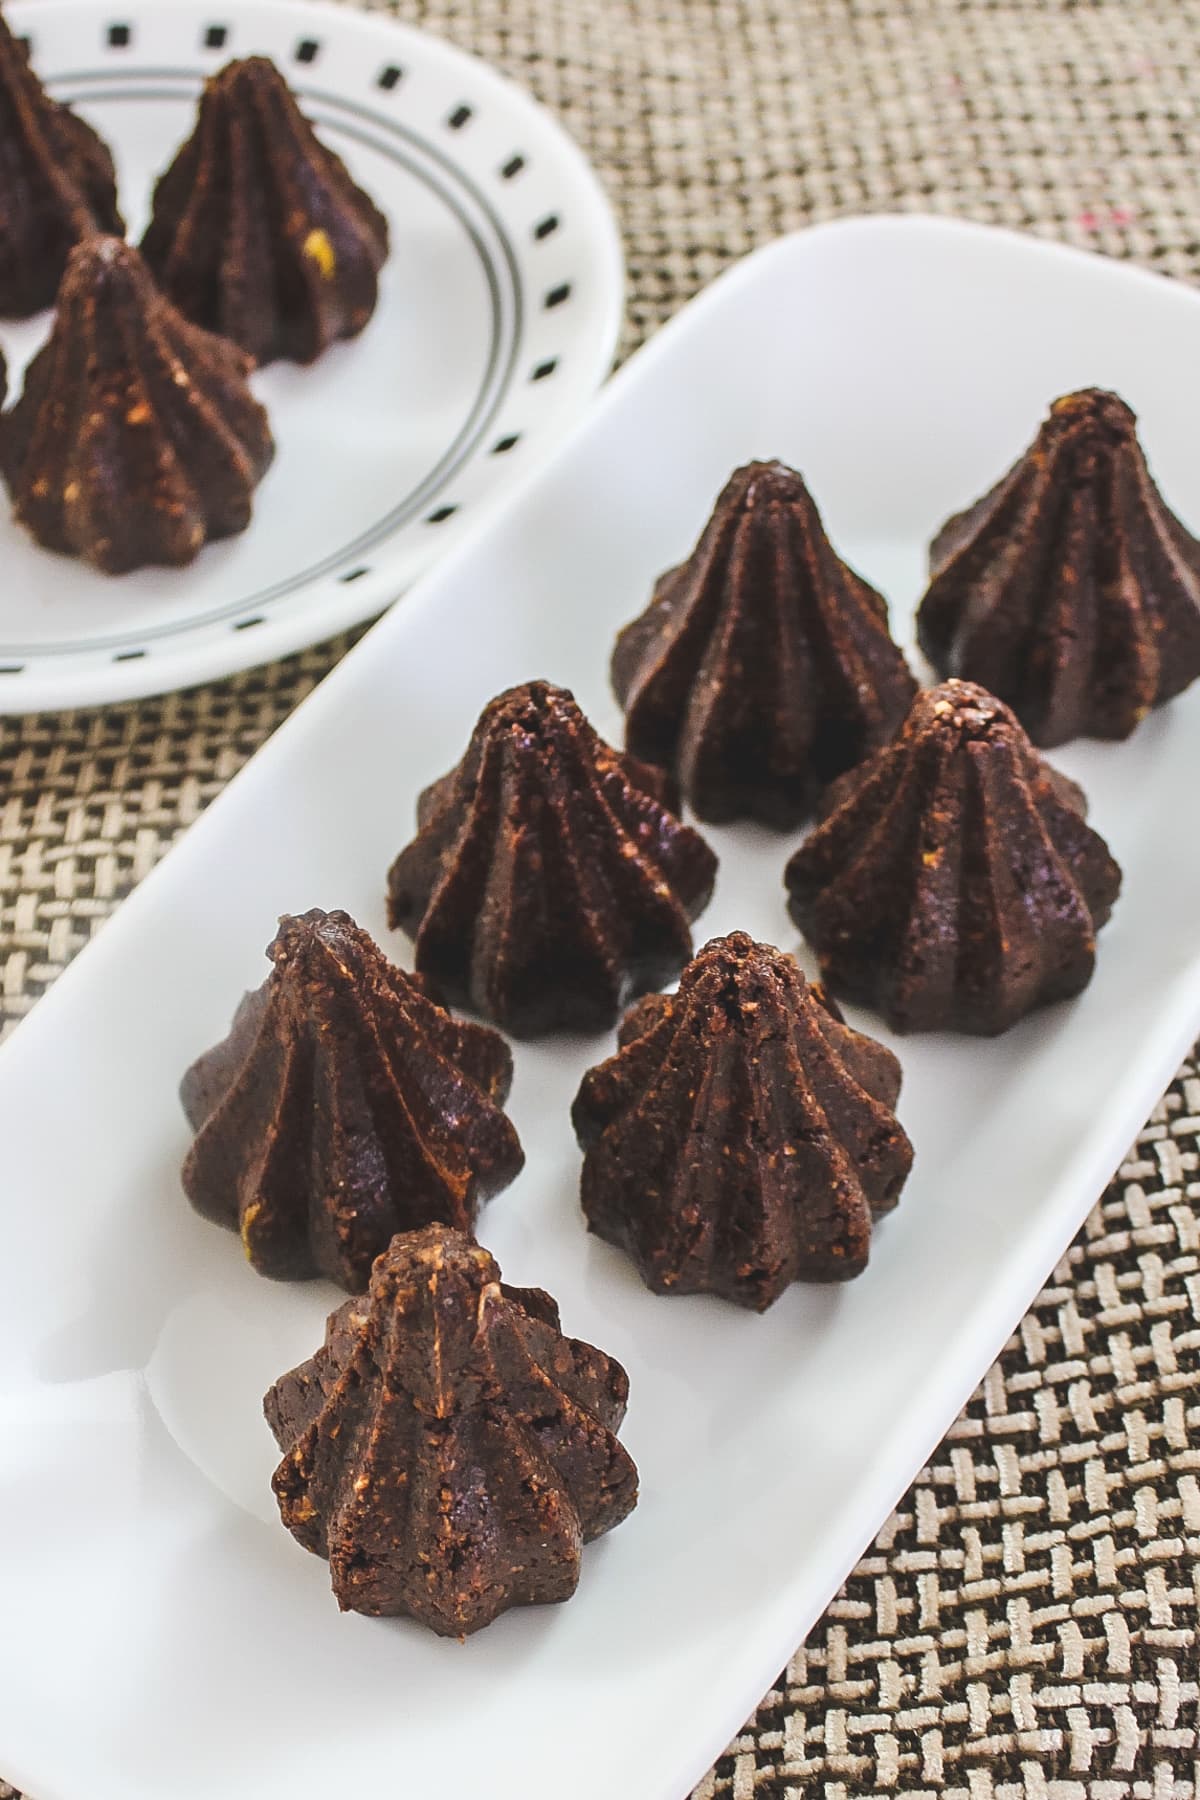 Top view of 6 chocolate modak in white rectangle plate with 3 of them on round plate in back